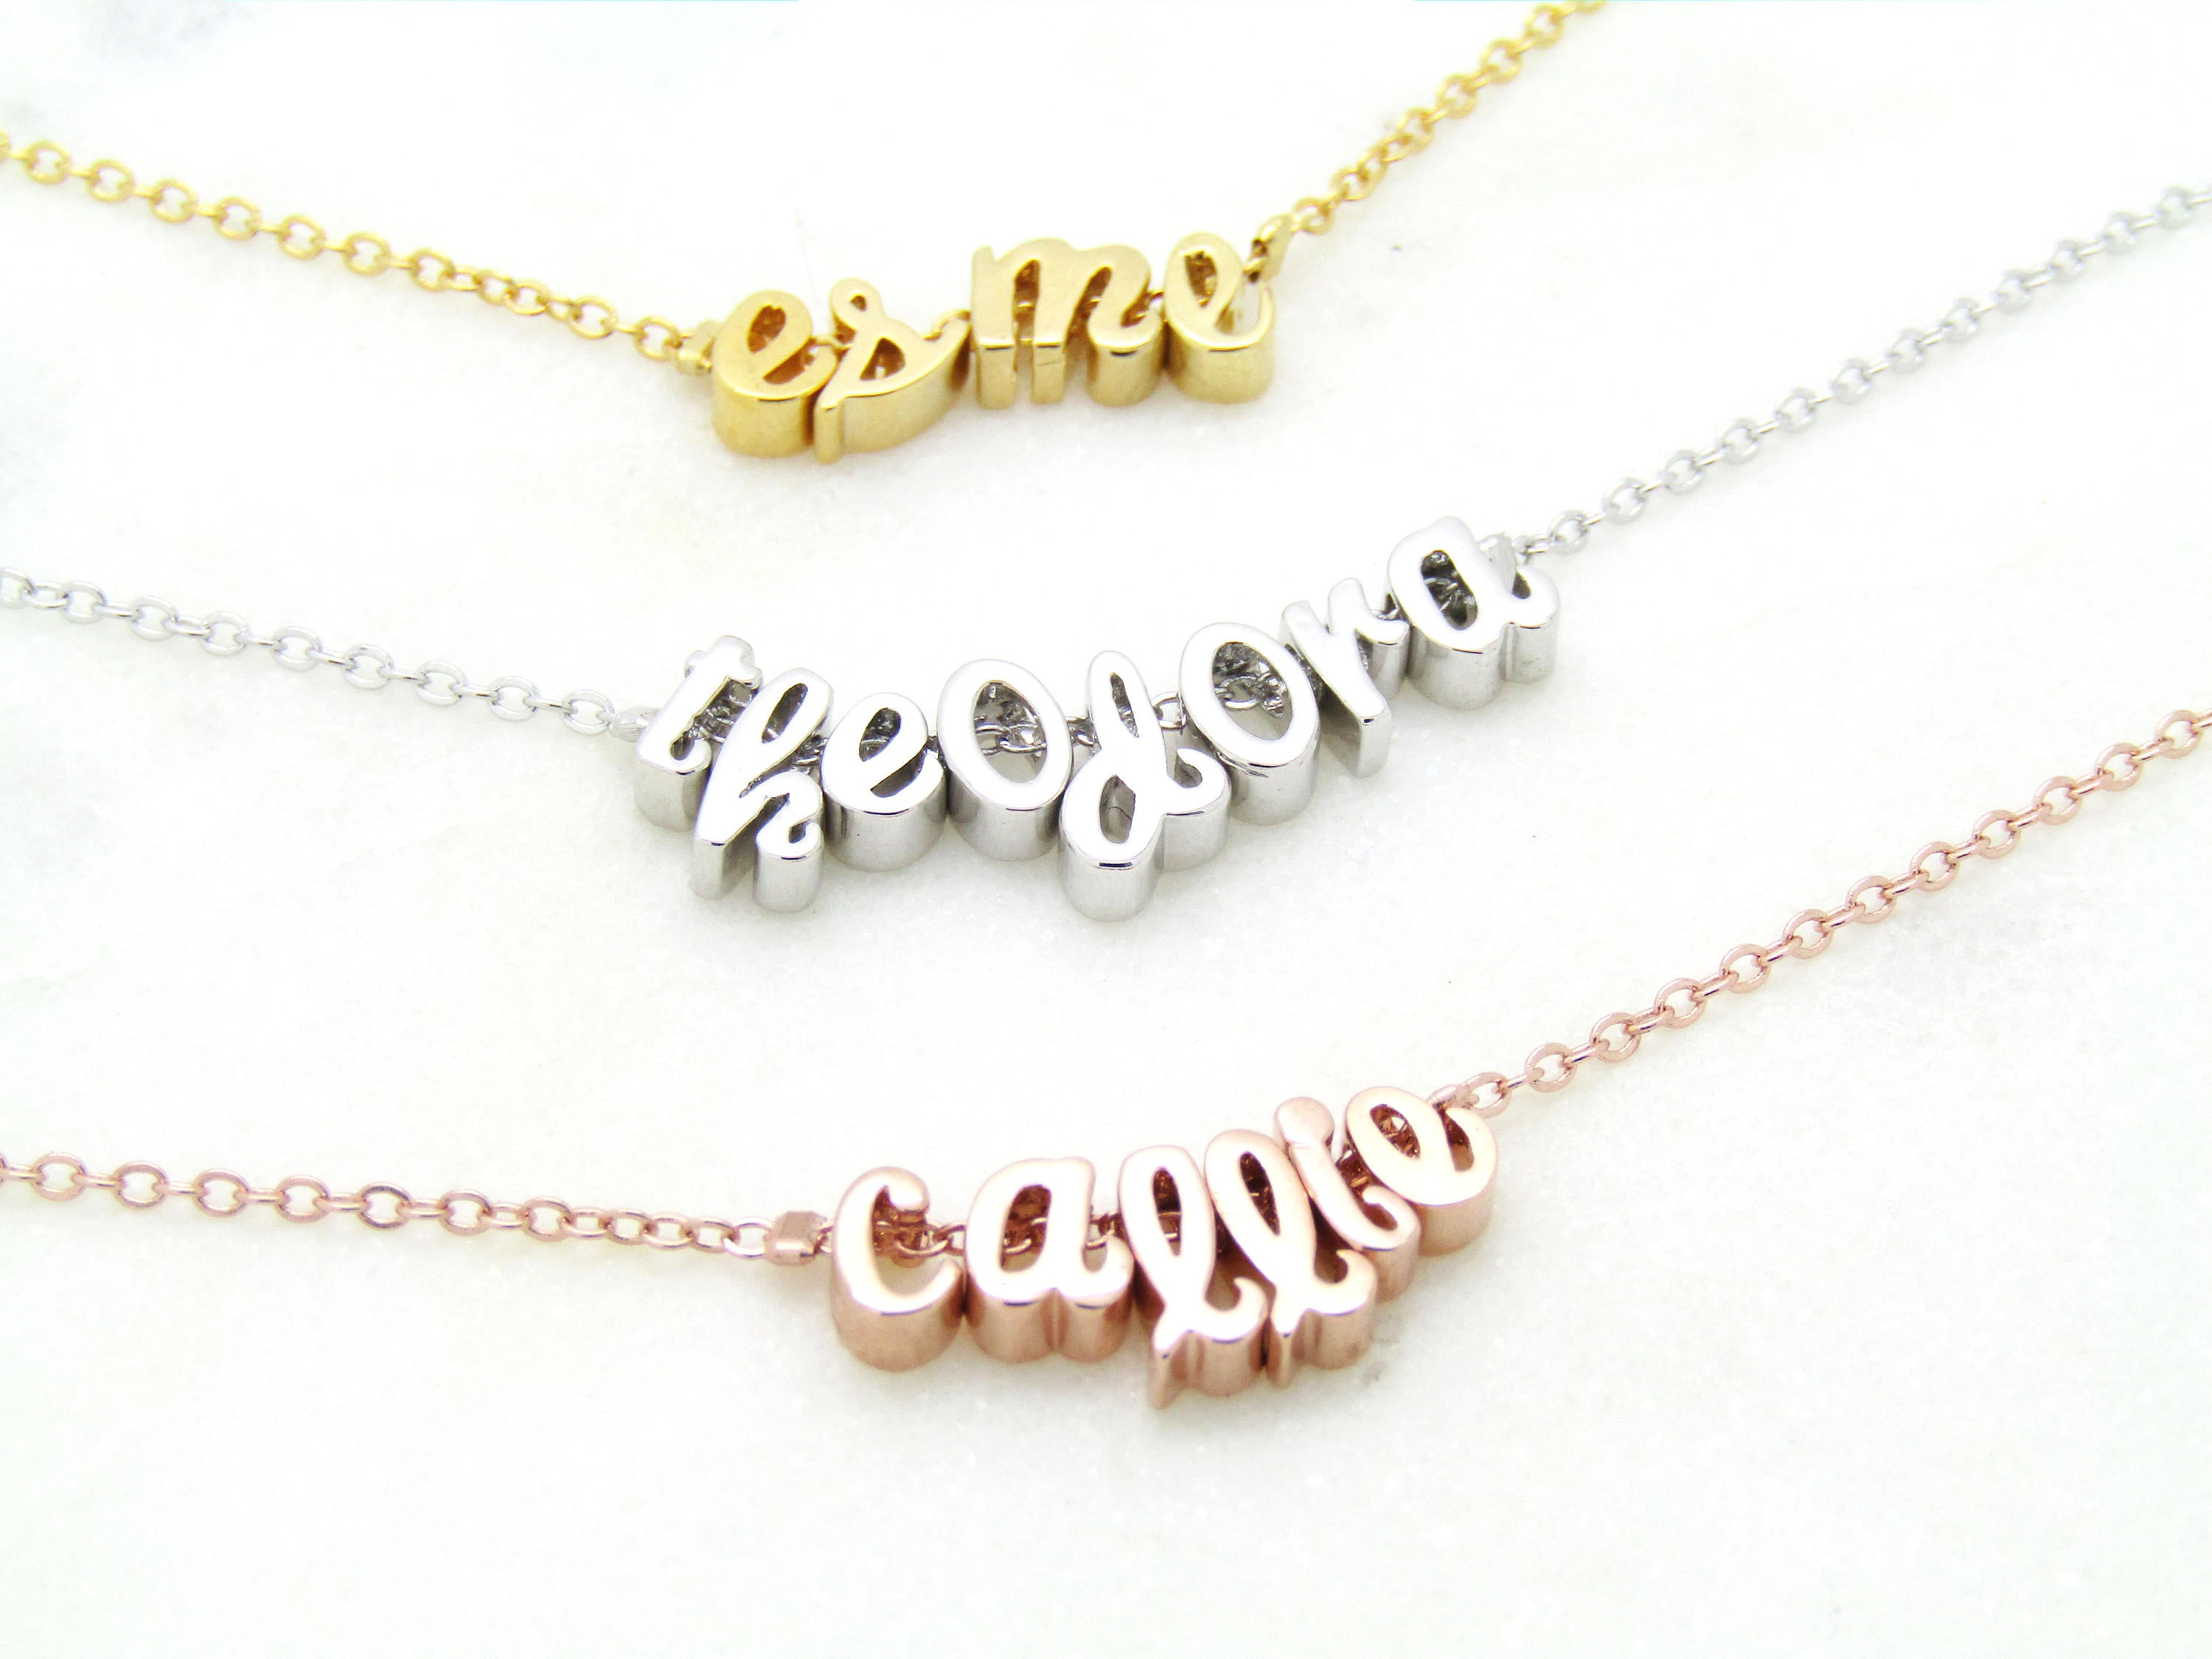  Personalized Gifts Initial Name Necklace Handmade